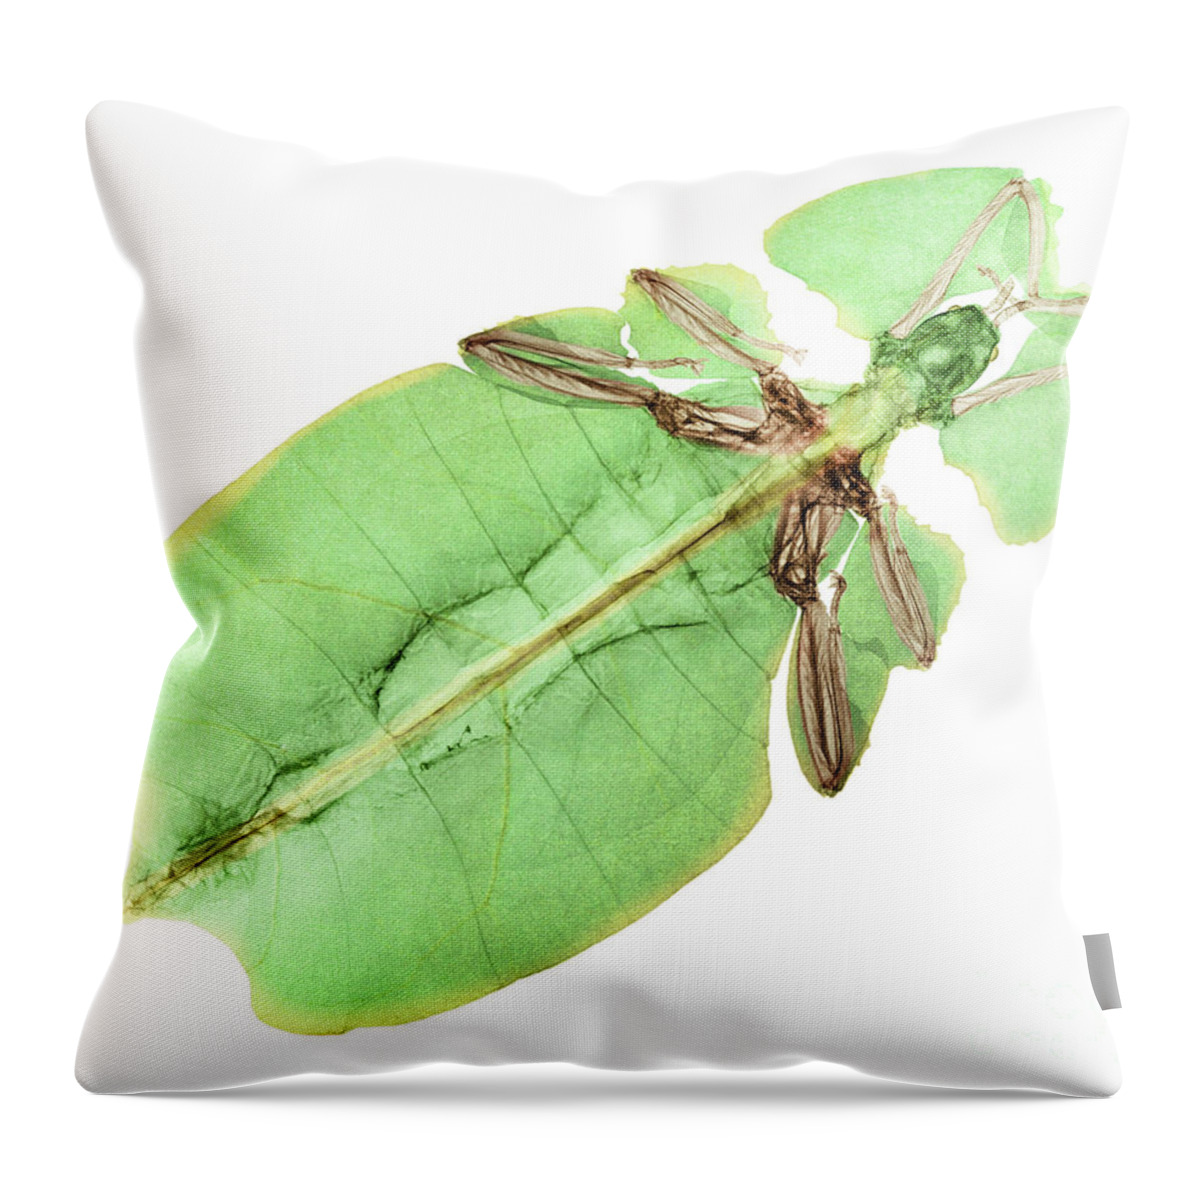 Giant Leaf Insect Throw Pillow featuring the photograph X-ray Of A Giant Leaf Insect by Ted Kinsman